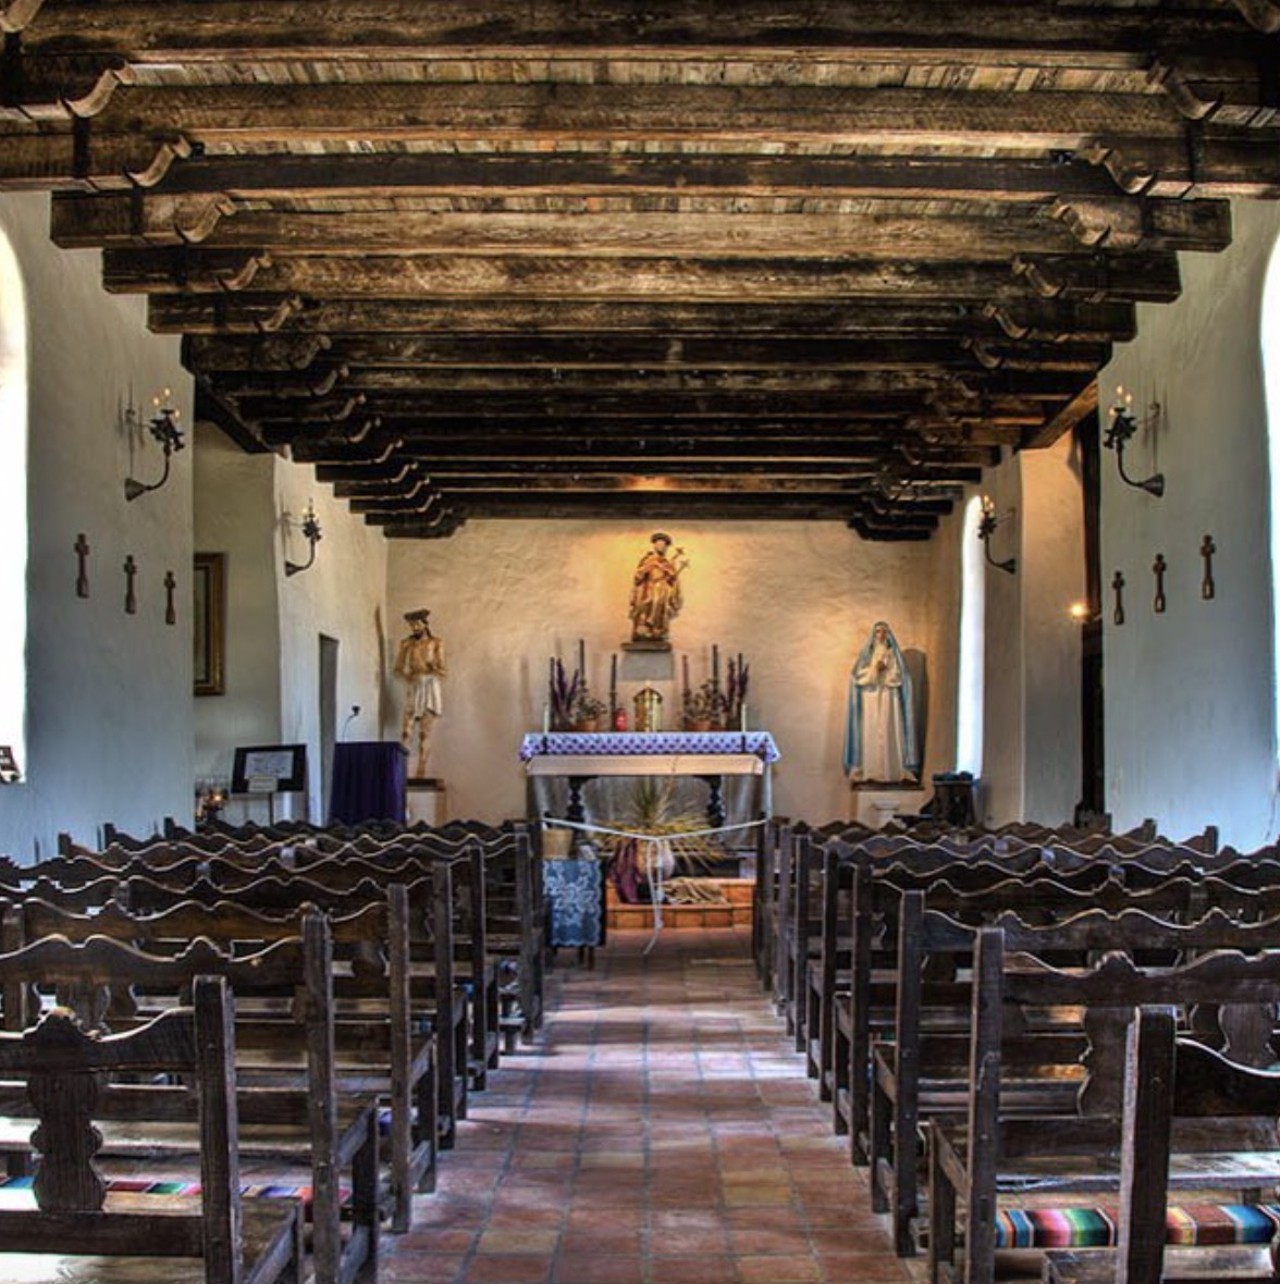 Attend mass at one of the Missions
The four Spanish frontier outposts that make up the San Antonio Missions National Historic Park are all functioning Catholic churches and hold Christmas Eve mass. 
Photo via Instagram / missionsofsanantonio